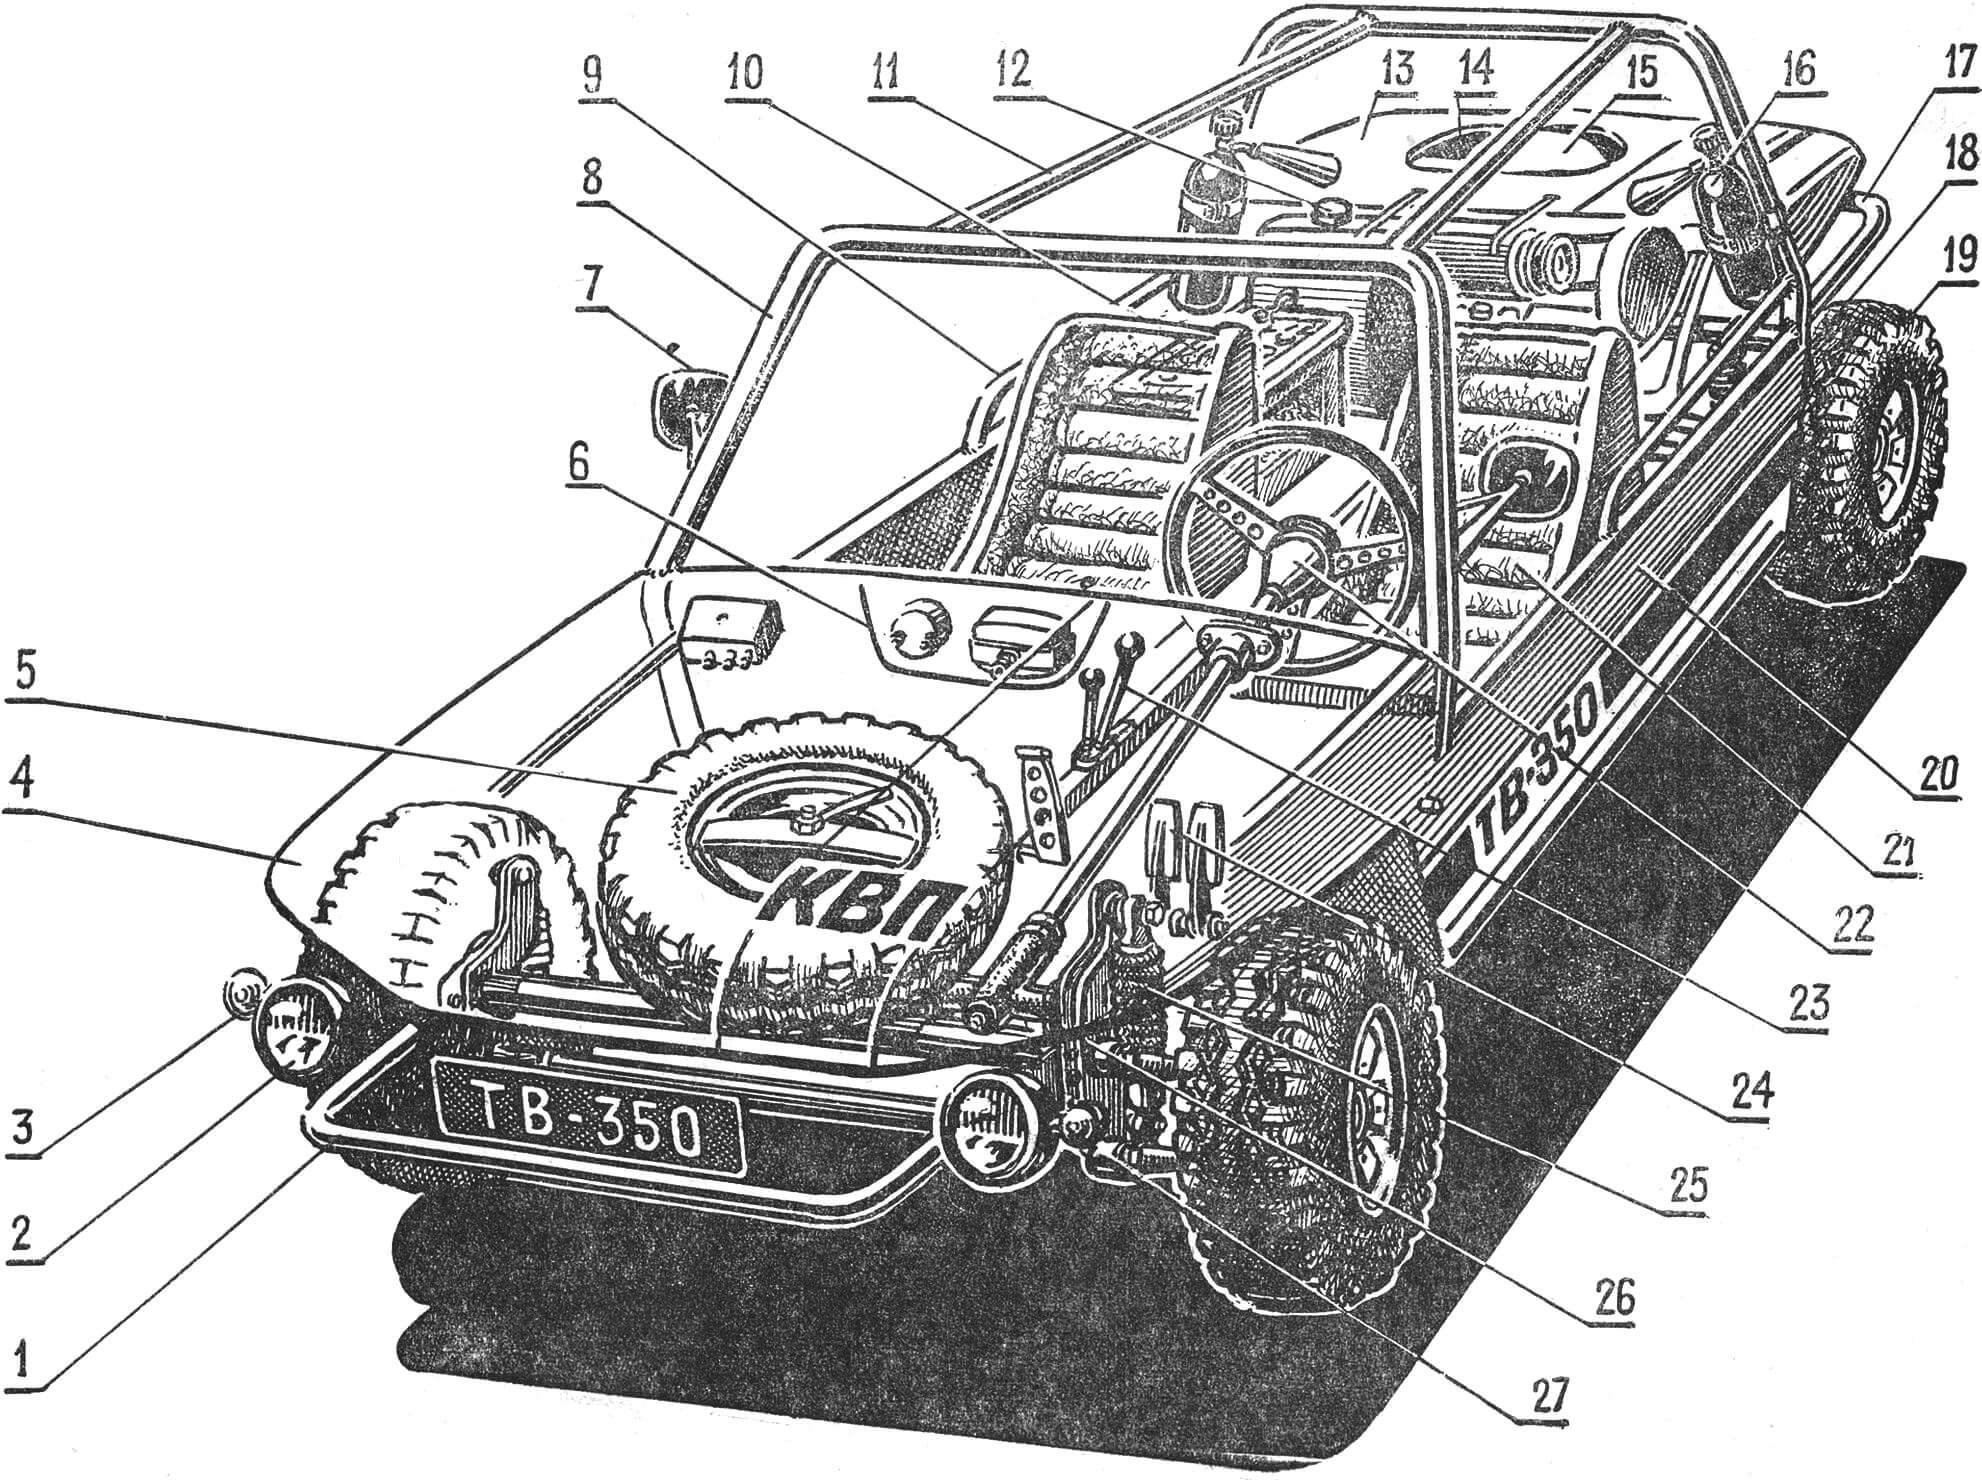 Rice. 1. General layout of the KVP buggy microcar